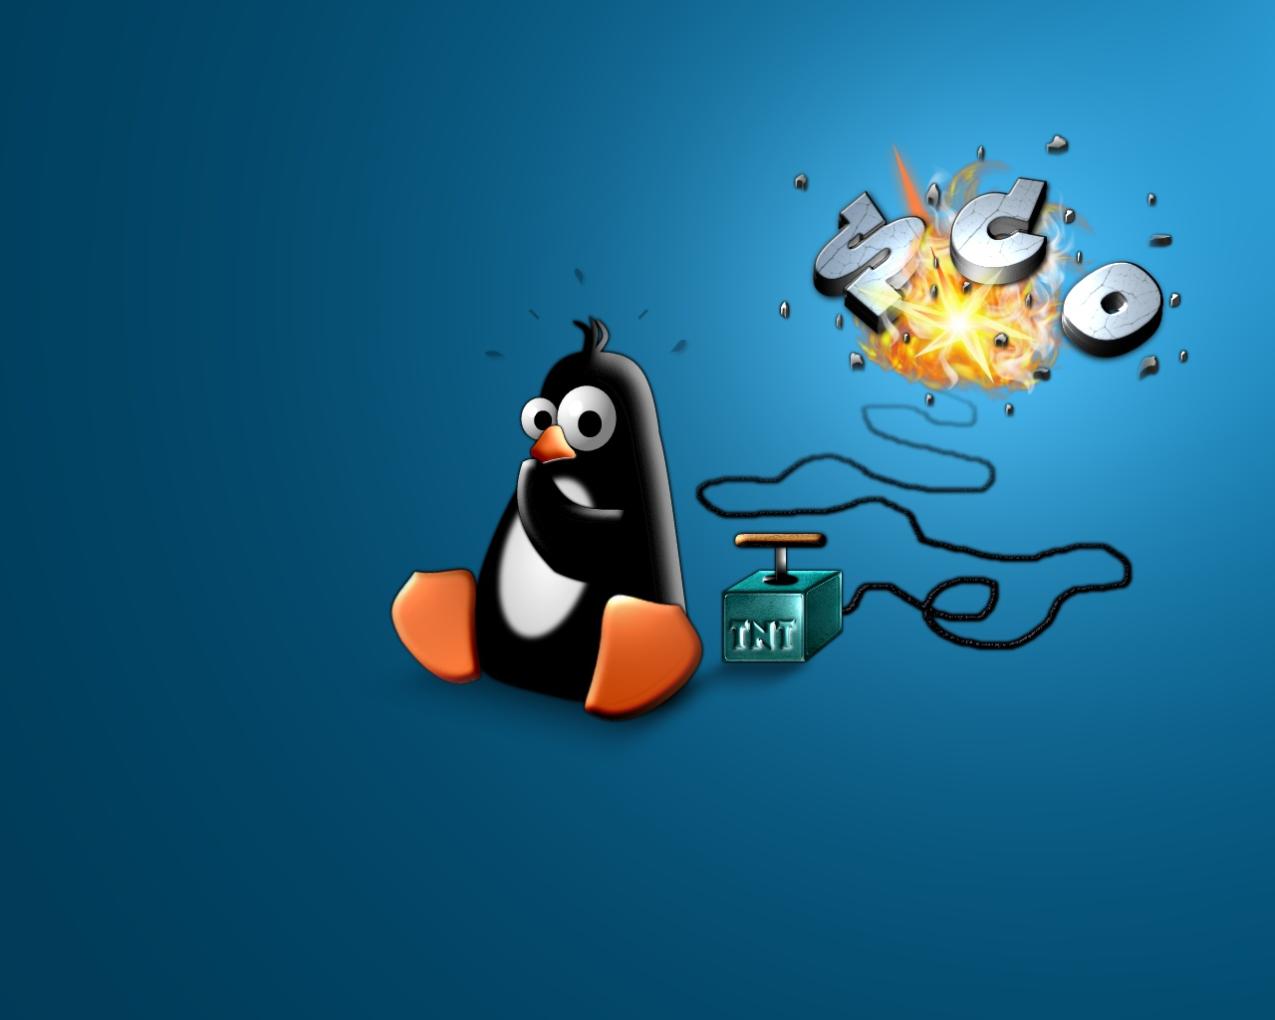 What Are The Most Common Linux Command Line Errors And How Can I Fix Them?